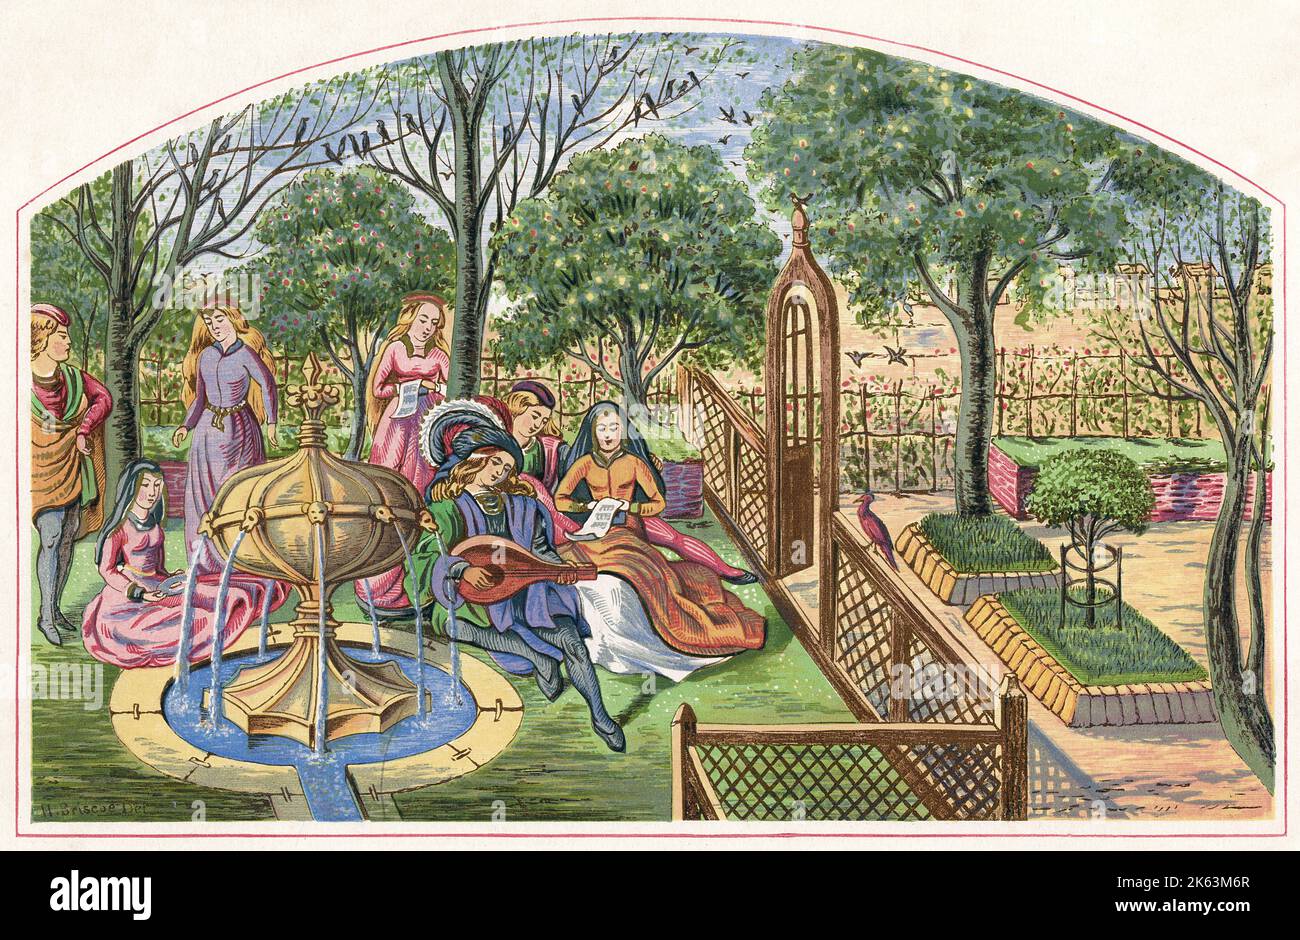 Aristocratic relaxation in the garden of Deduit - playing music as they sit round a decorative fountain Stock Photo